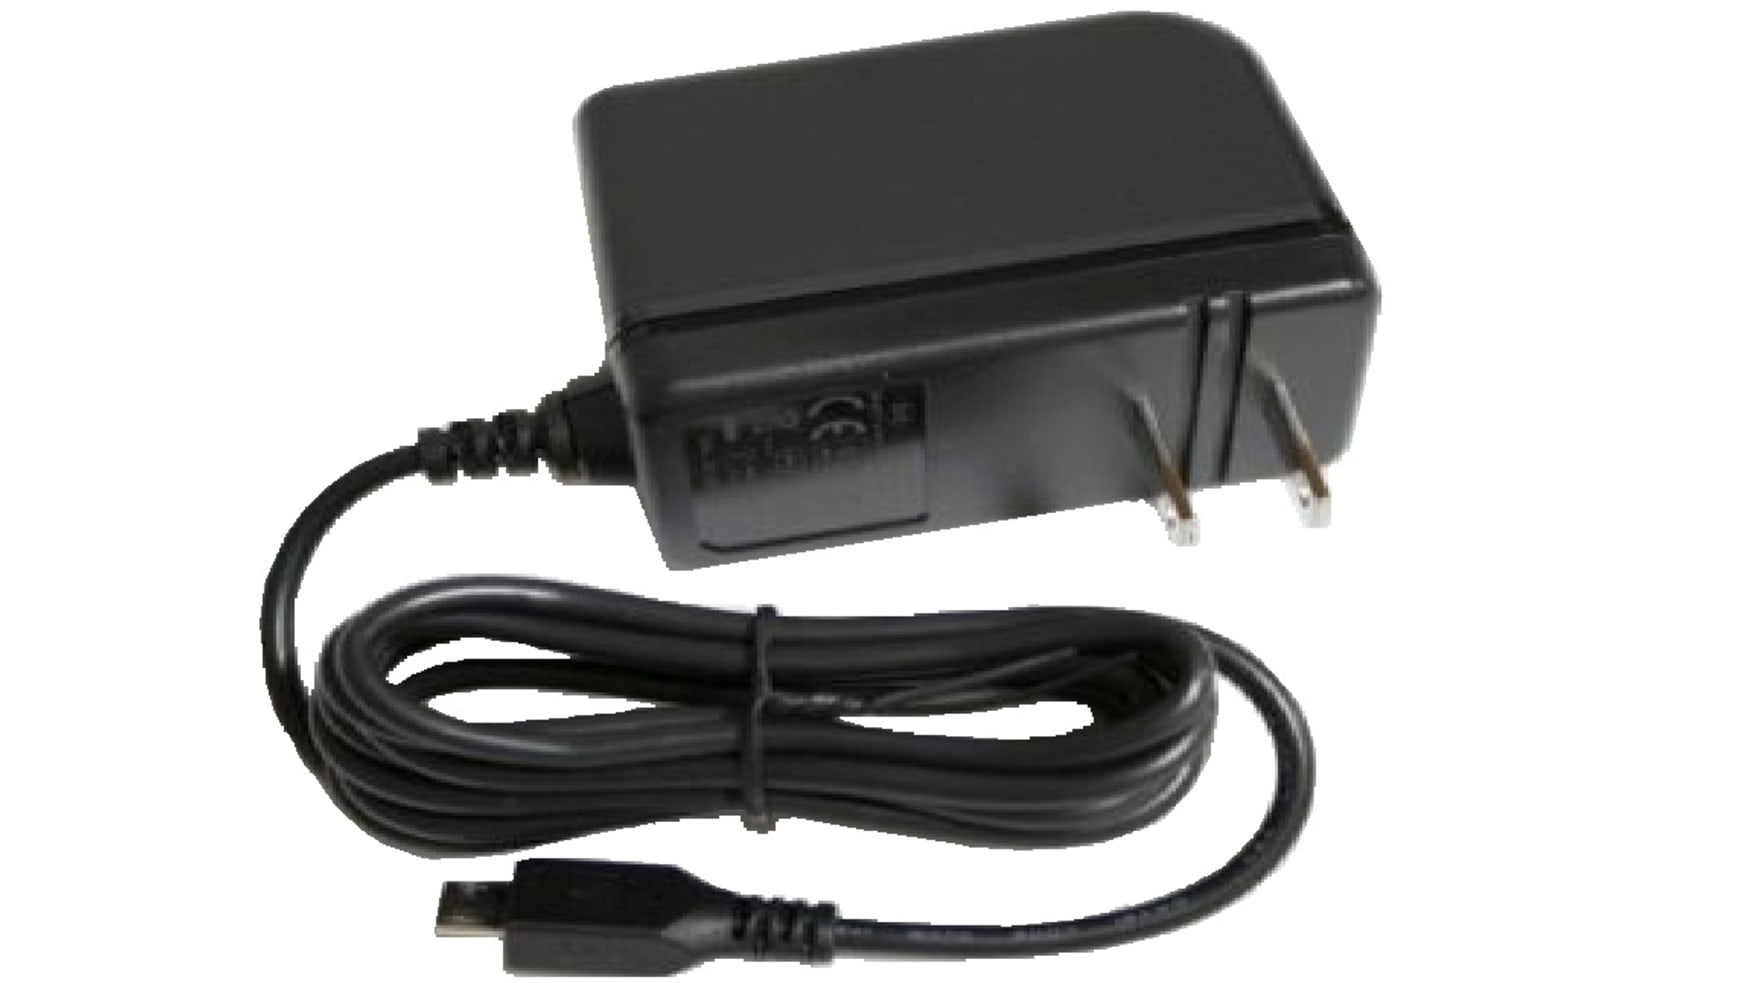 AC Adapter for Raspberry Pi